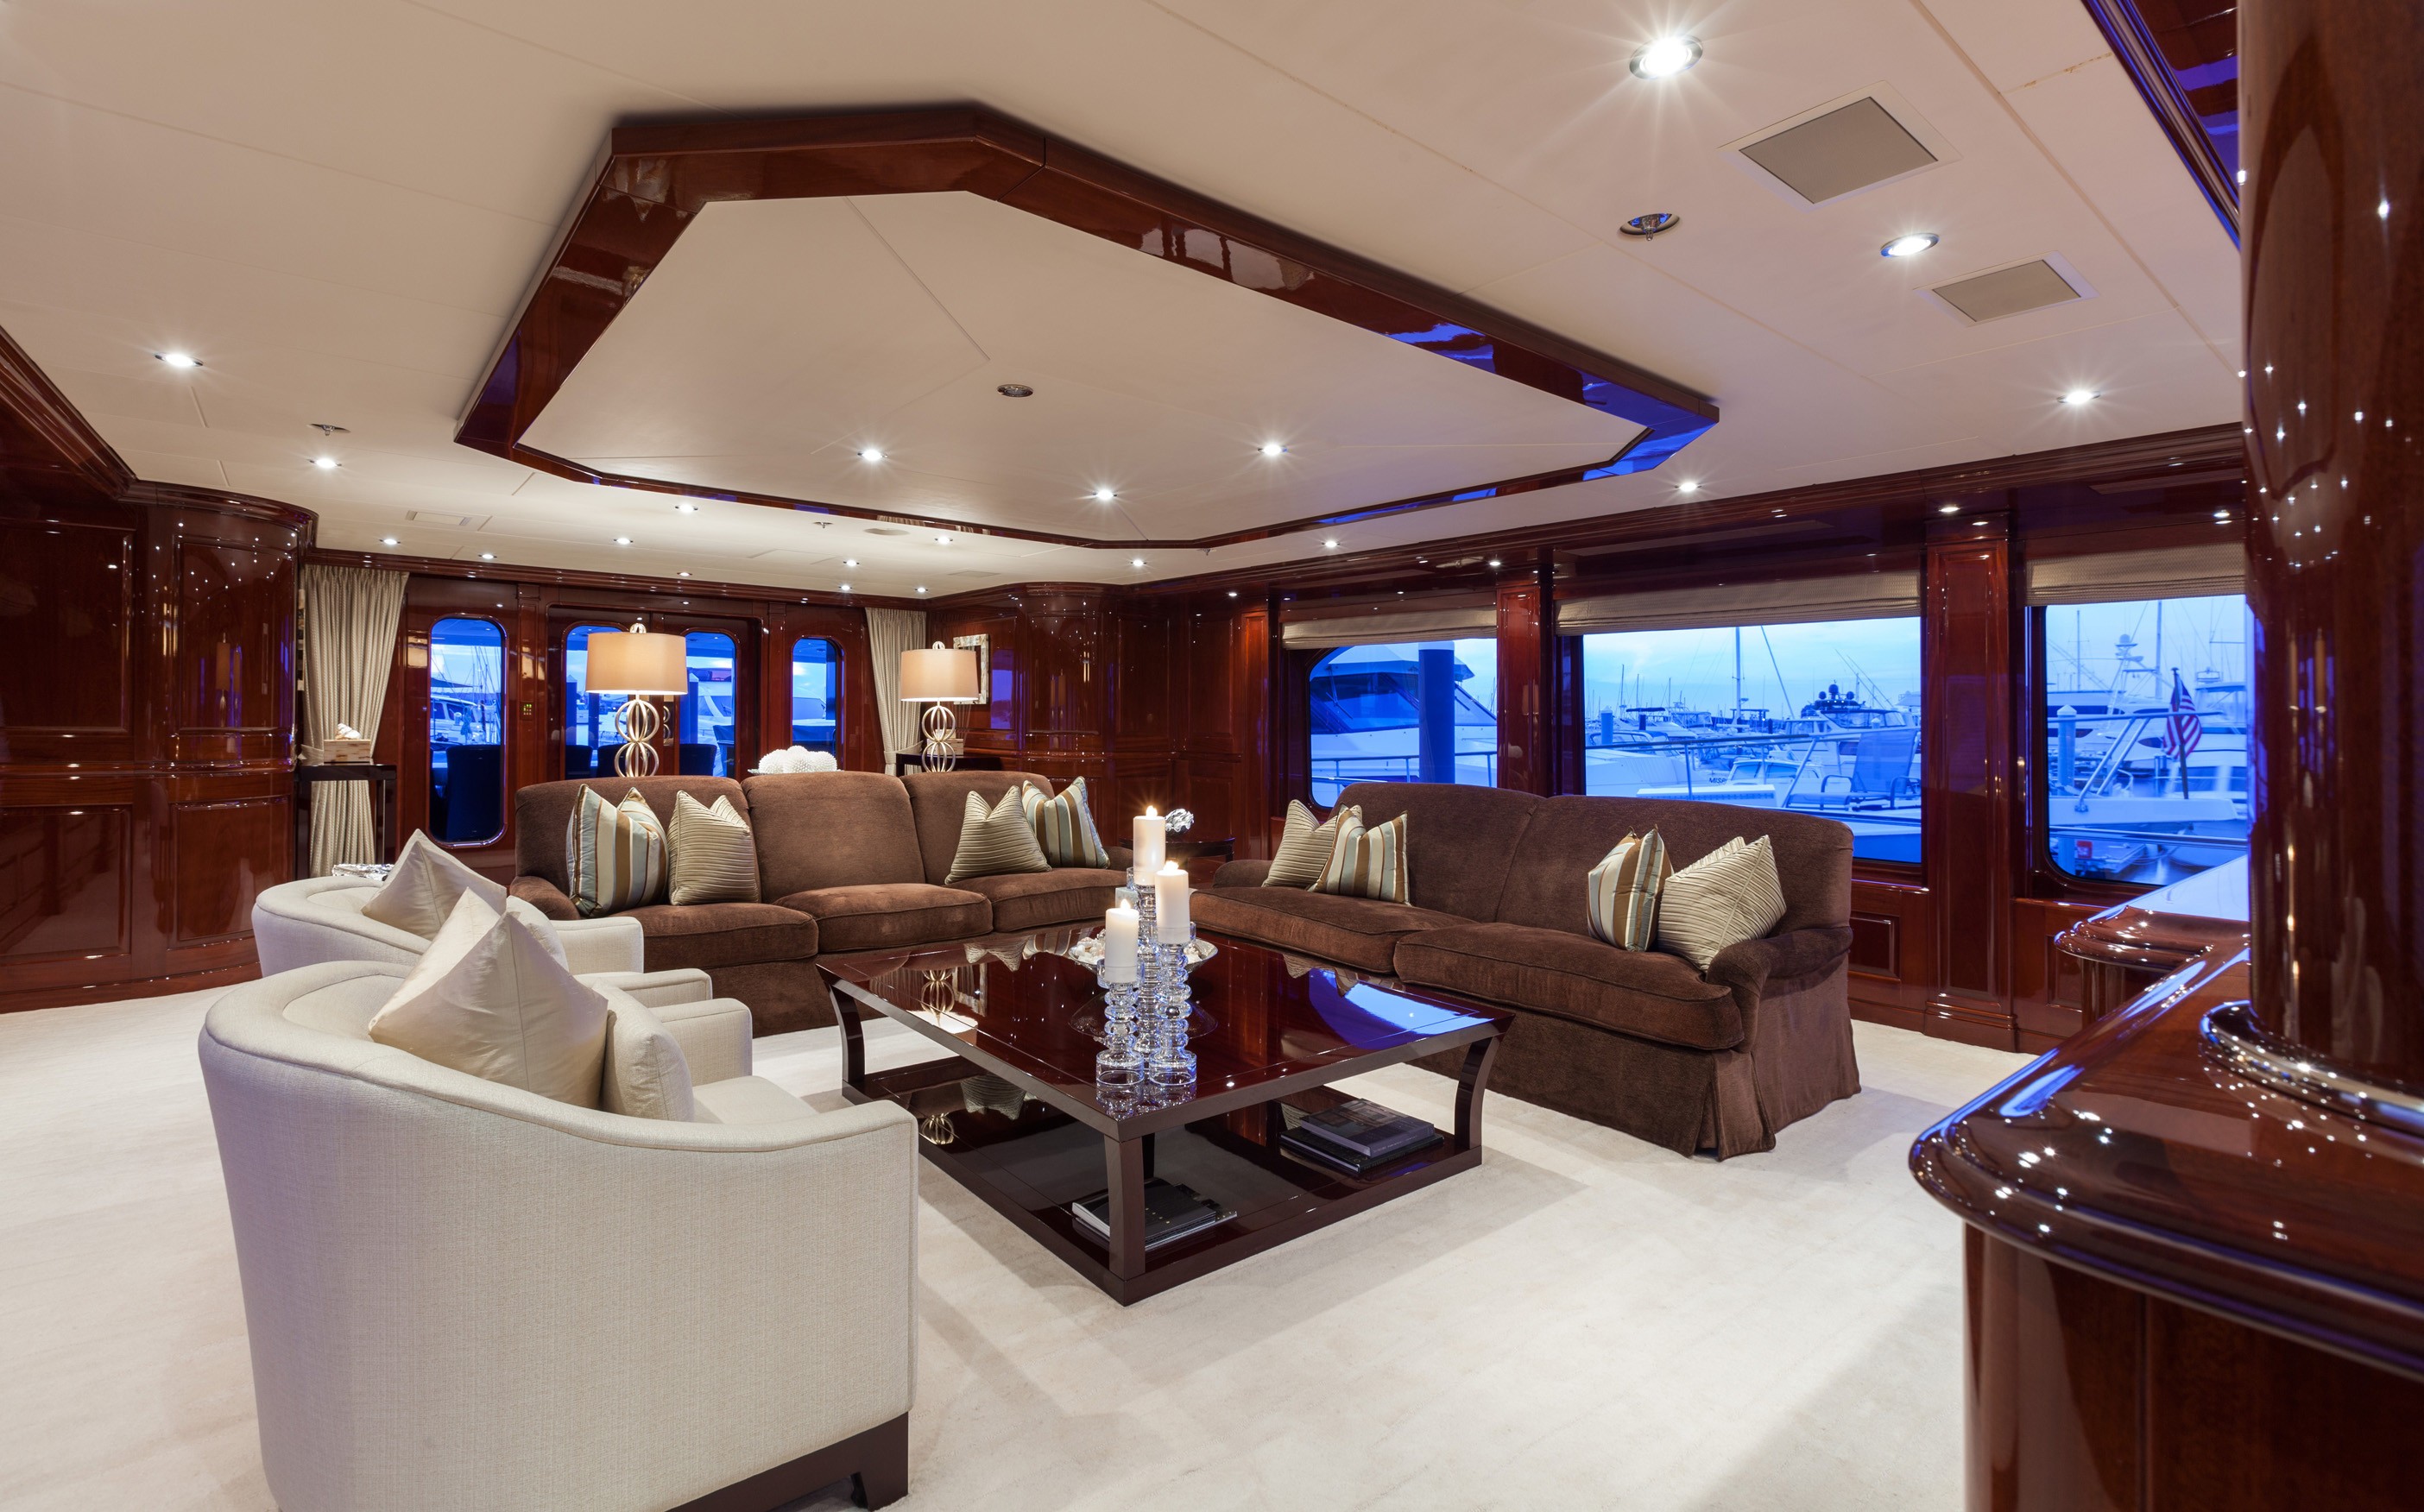 The 48m Yacht MATCH POINT